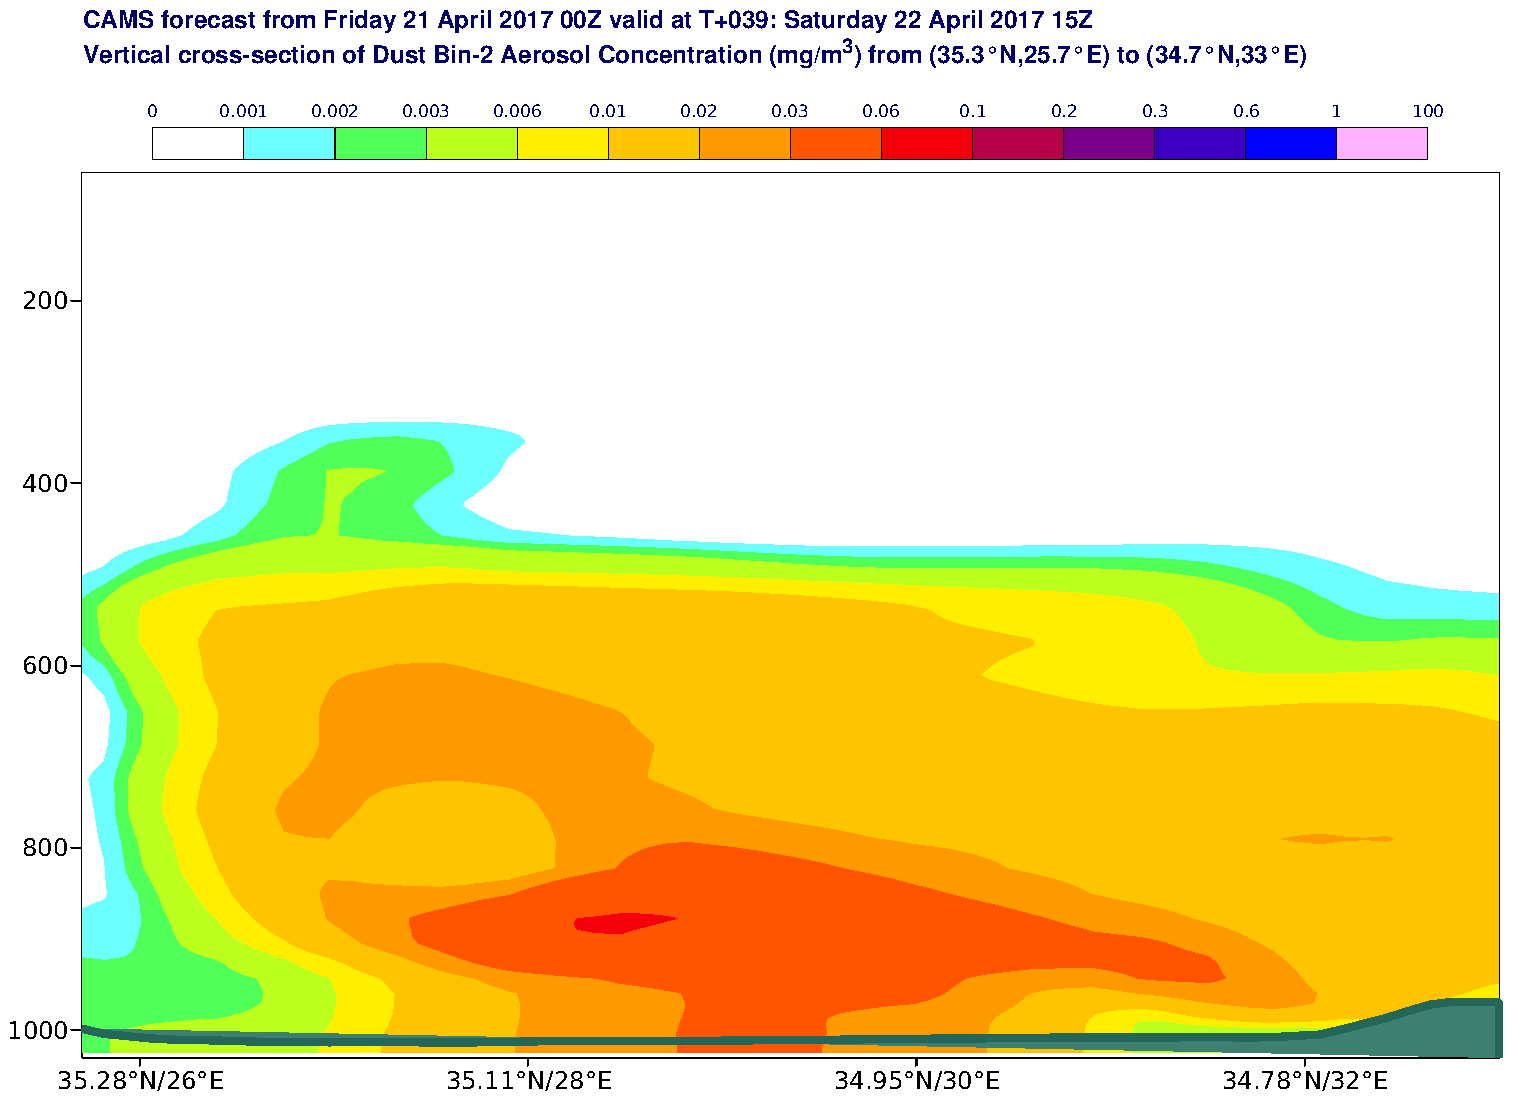 Vertical cross-section of Dust Bin-2 Aerosol Concentration (mg/m3) valid at T39 - 2017-04-22 15:00